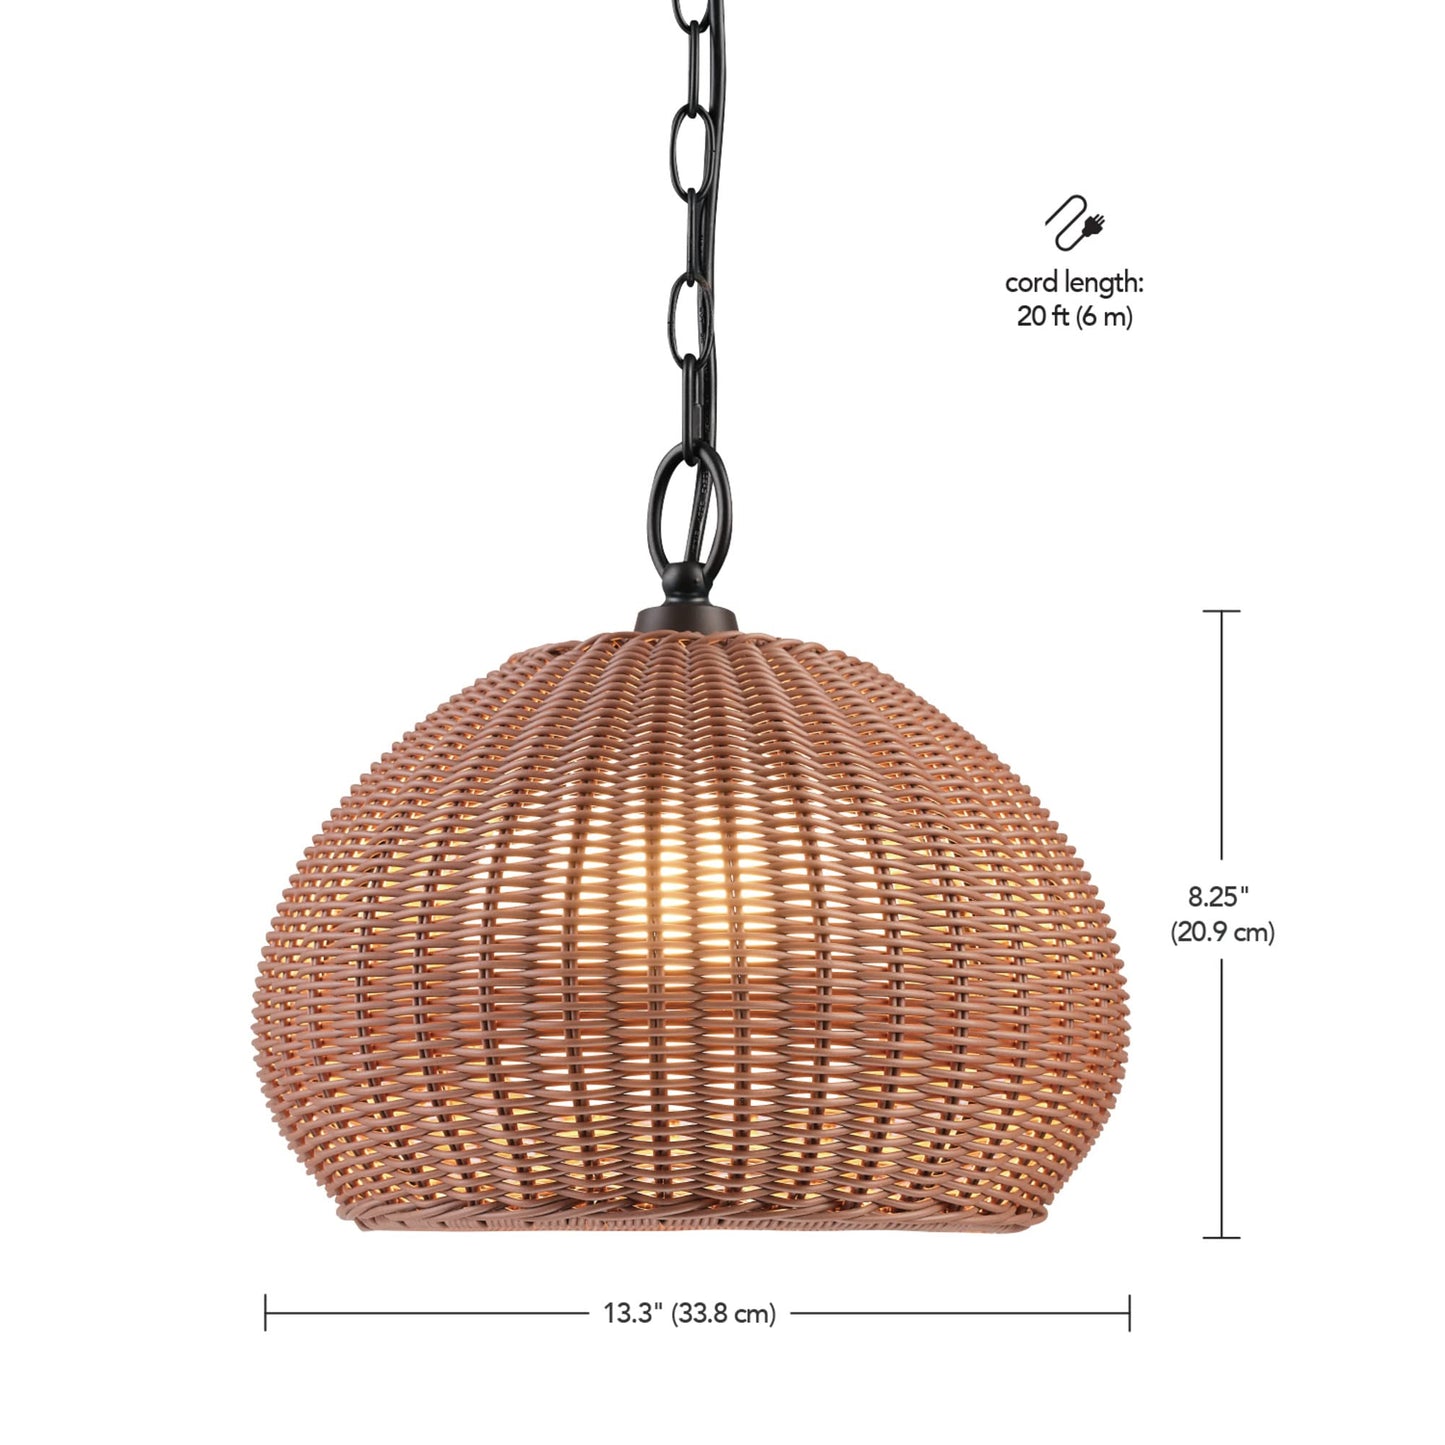 Globe 44761 1-Light Outdoor Plug-in Pendant Light, Plastic Rattan Shade, Frosted Inner Shade, Bronze Hanging Cord and Chain, Kitchen Island, Cafe, Ceiling Hanging Light, Bulb Not Included